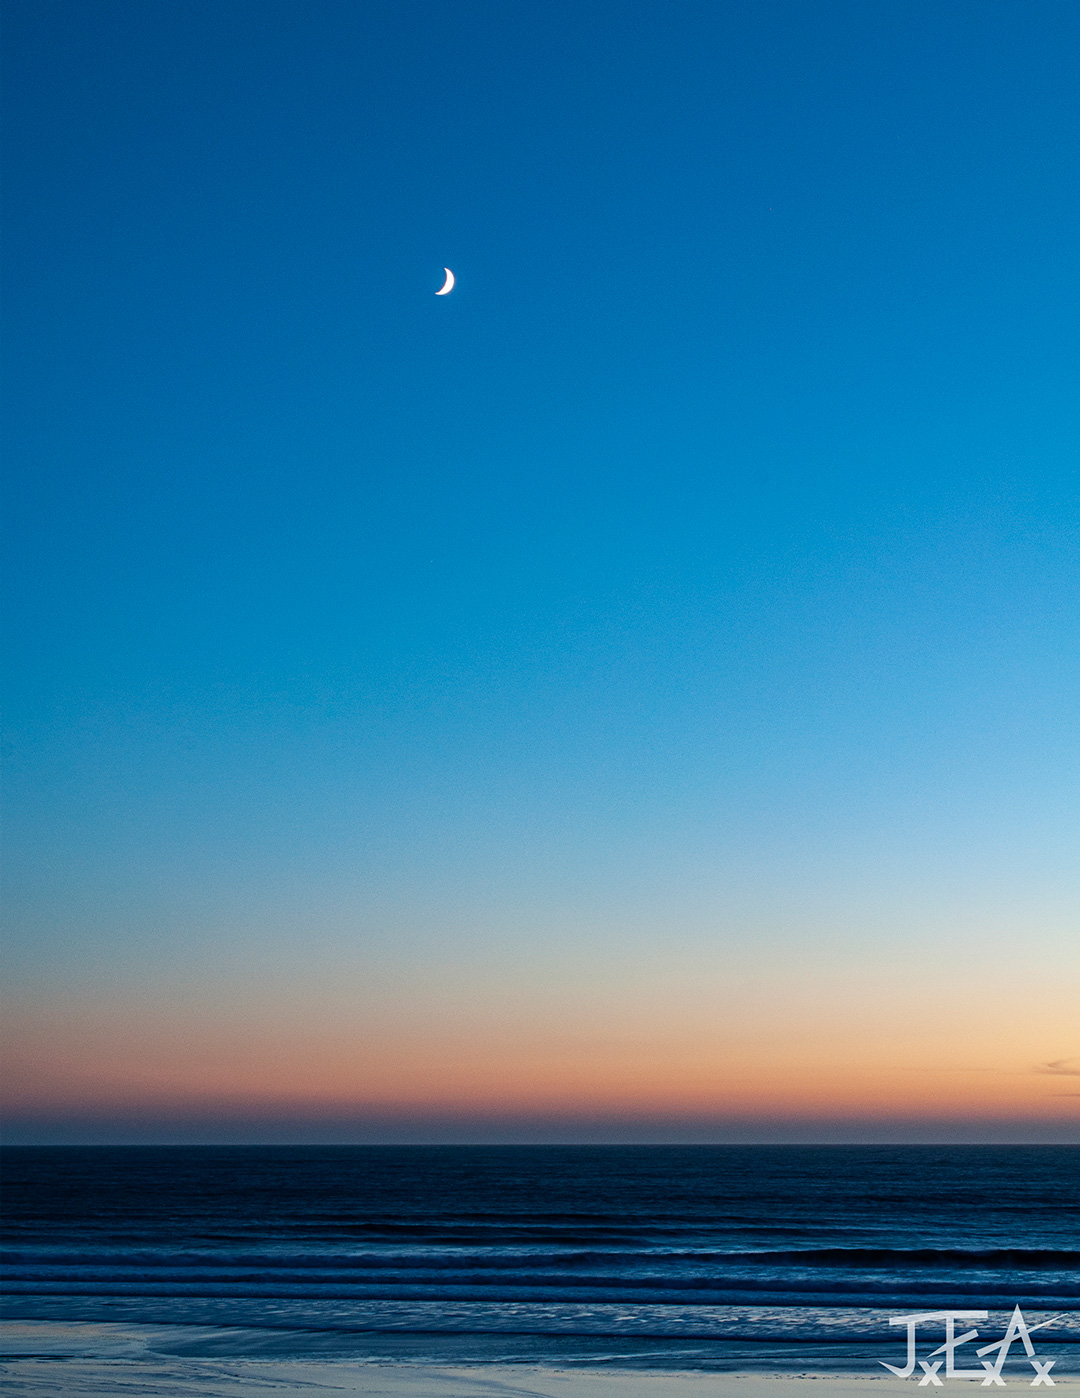 A wide shot of the Pacific Ocean bay at sunset, with a fingernail crescent moon hanging high above the horizon.